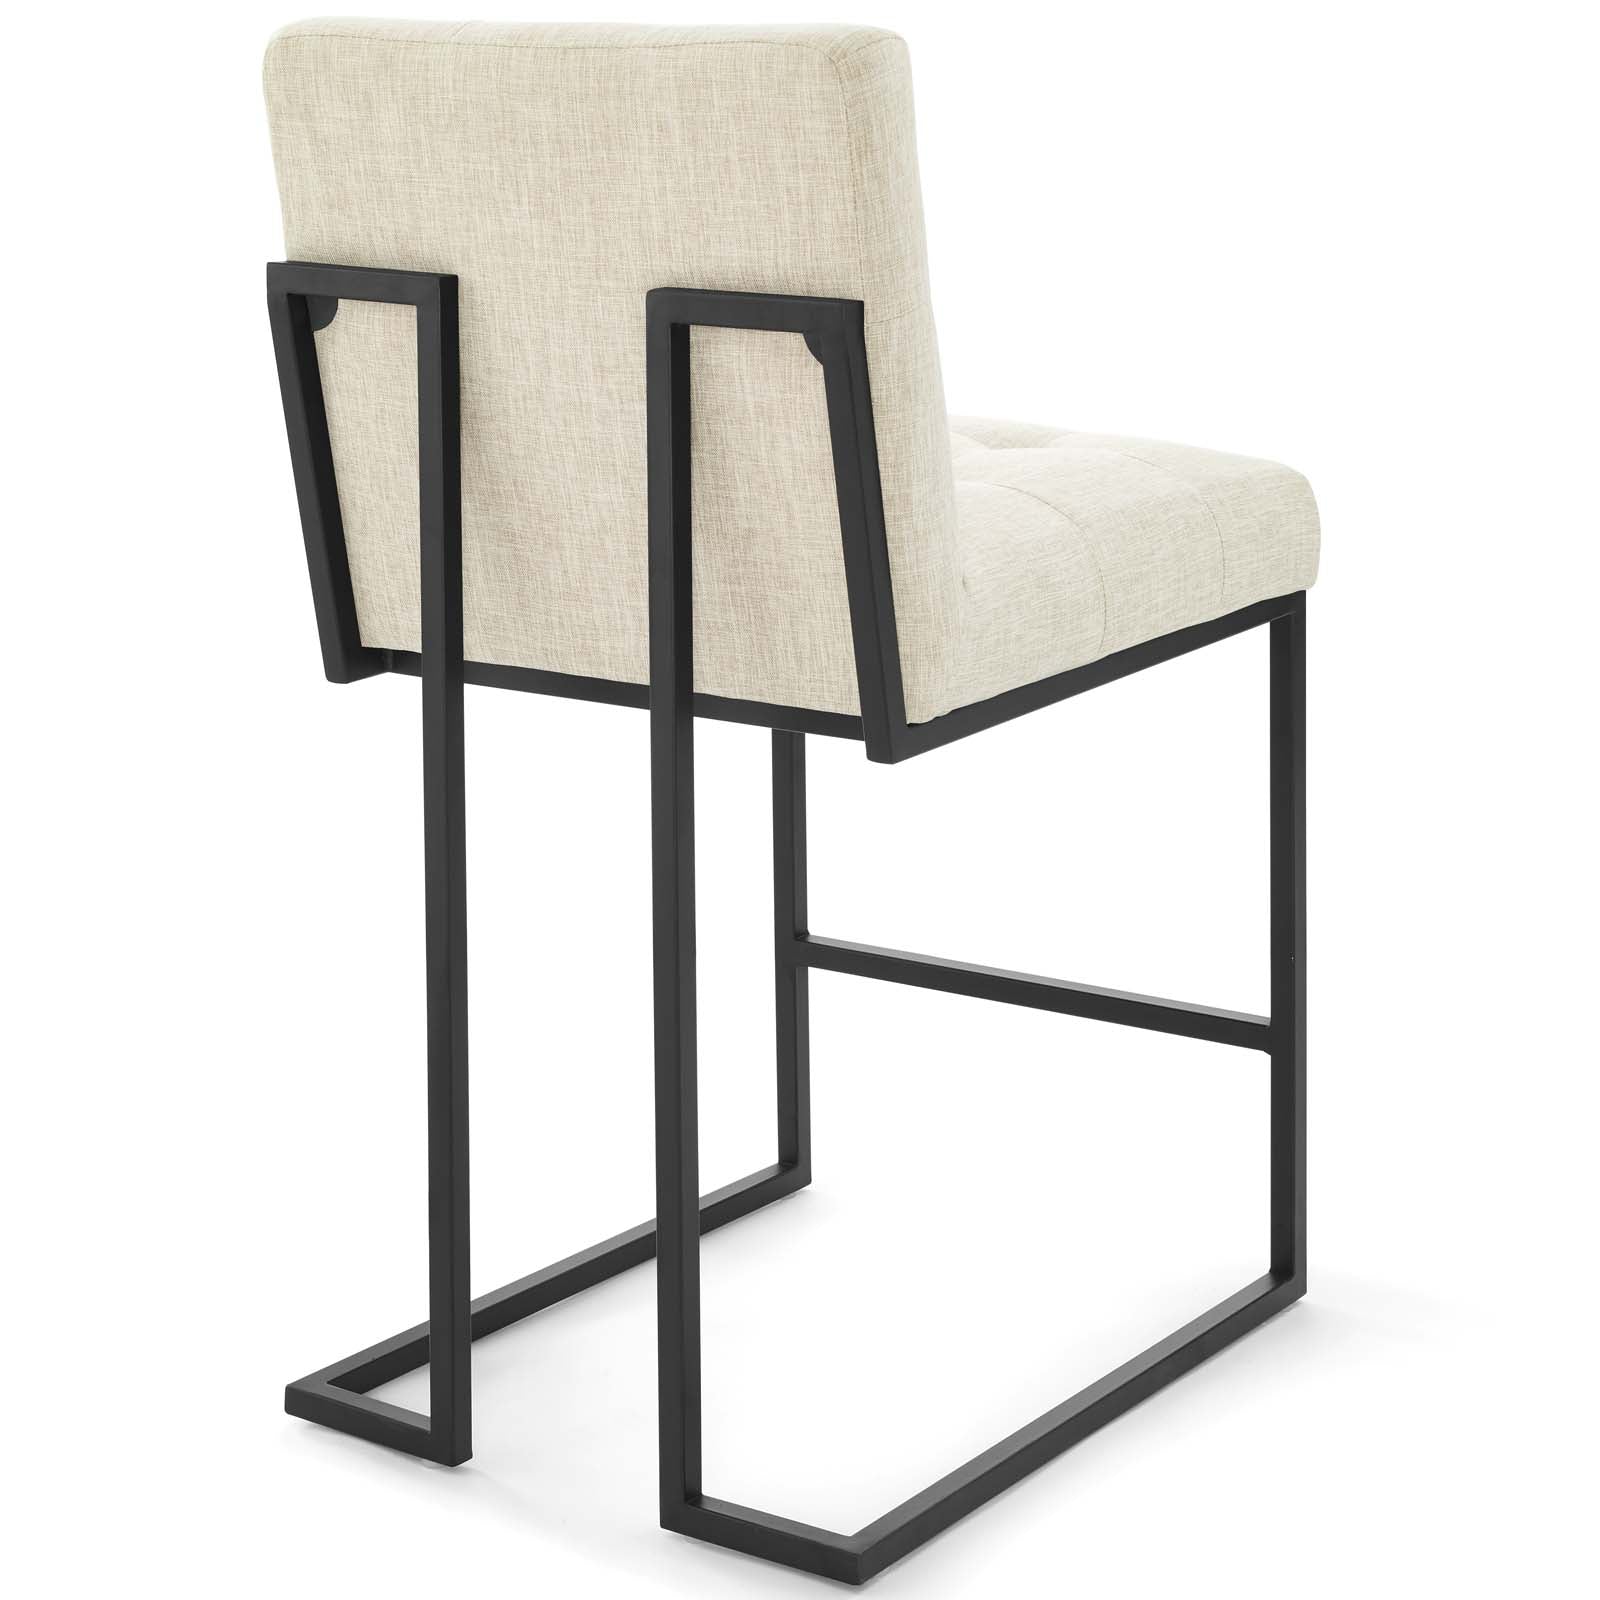 Modway Barstools - Privy Fabric Counter Stool Black Beige (Set of 2)